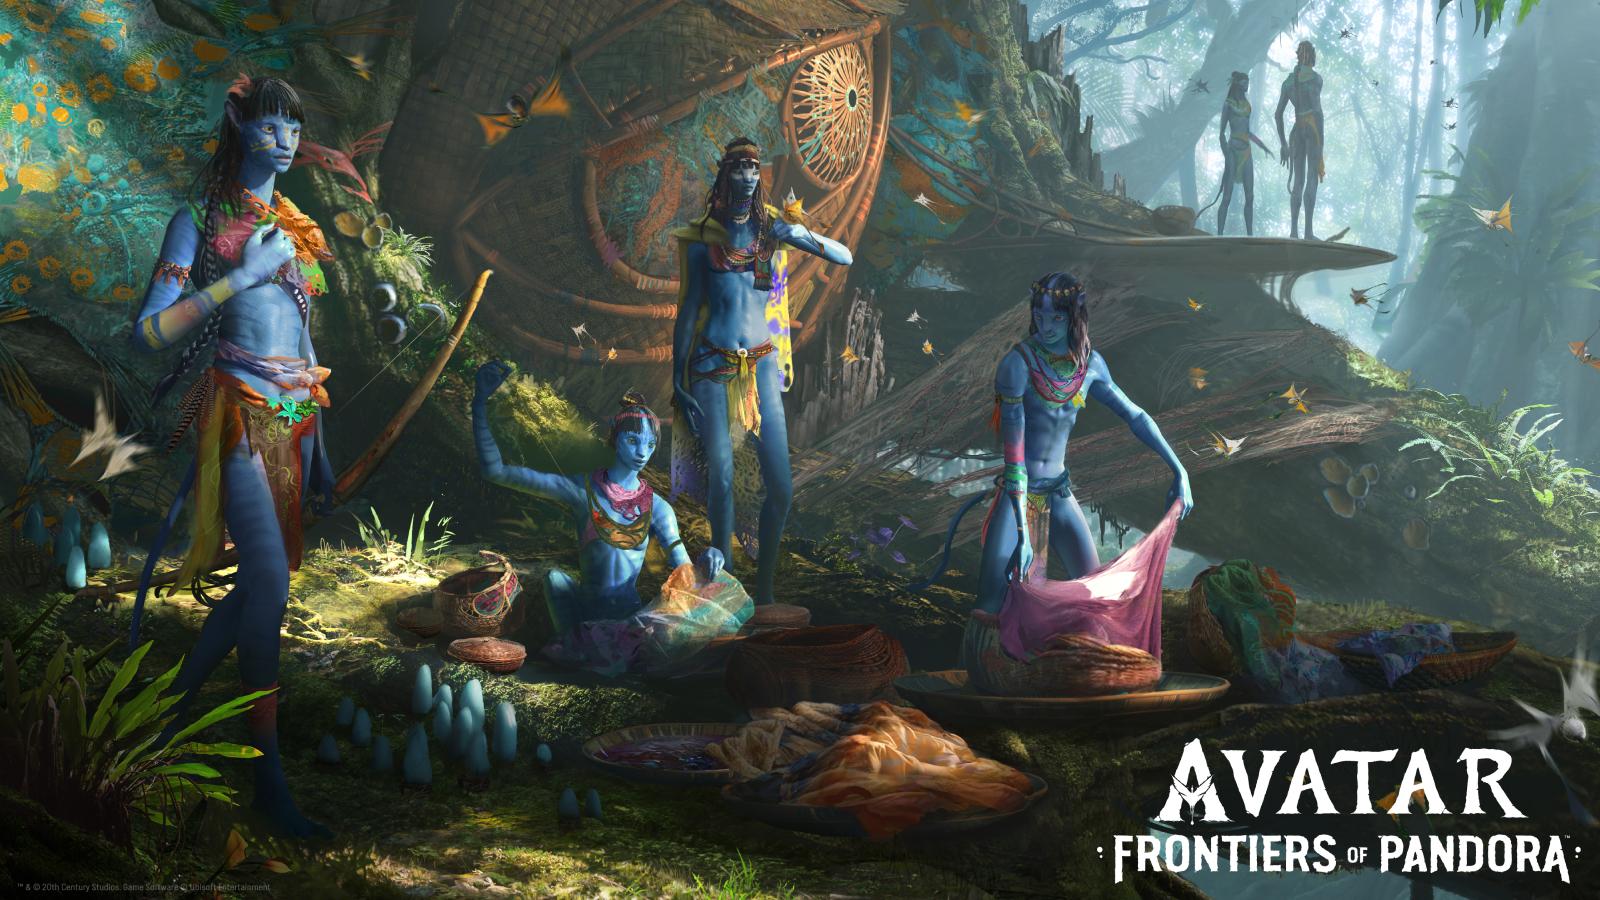 an image of some Na'vis in Avatar: Frontiers of Pandora